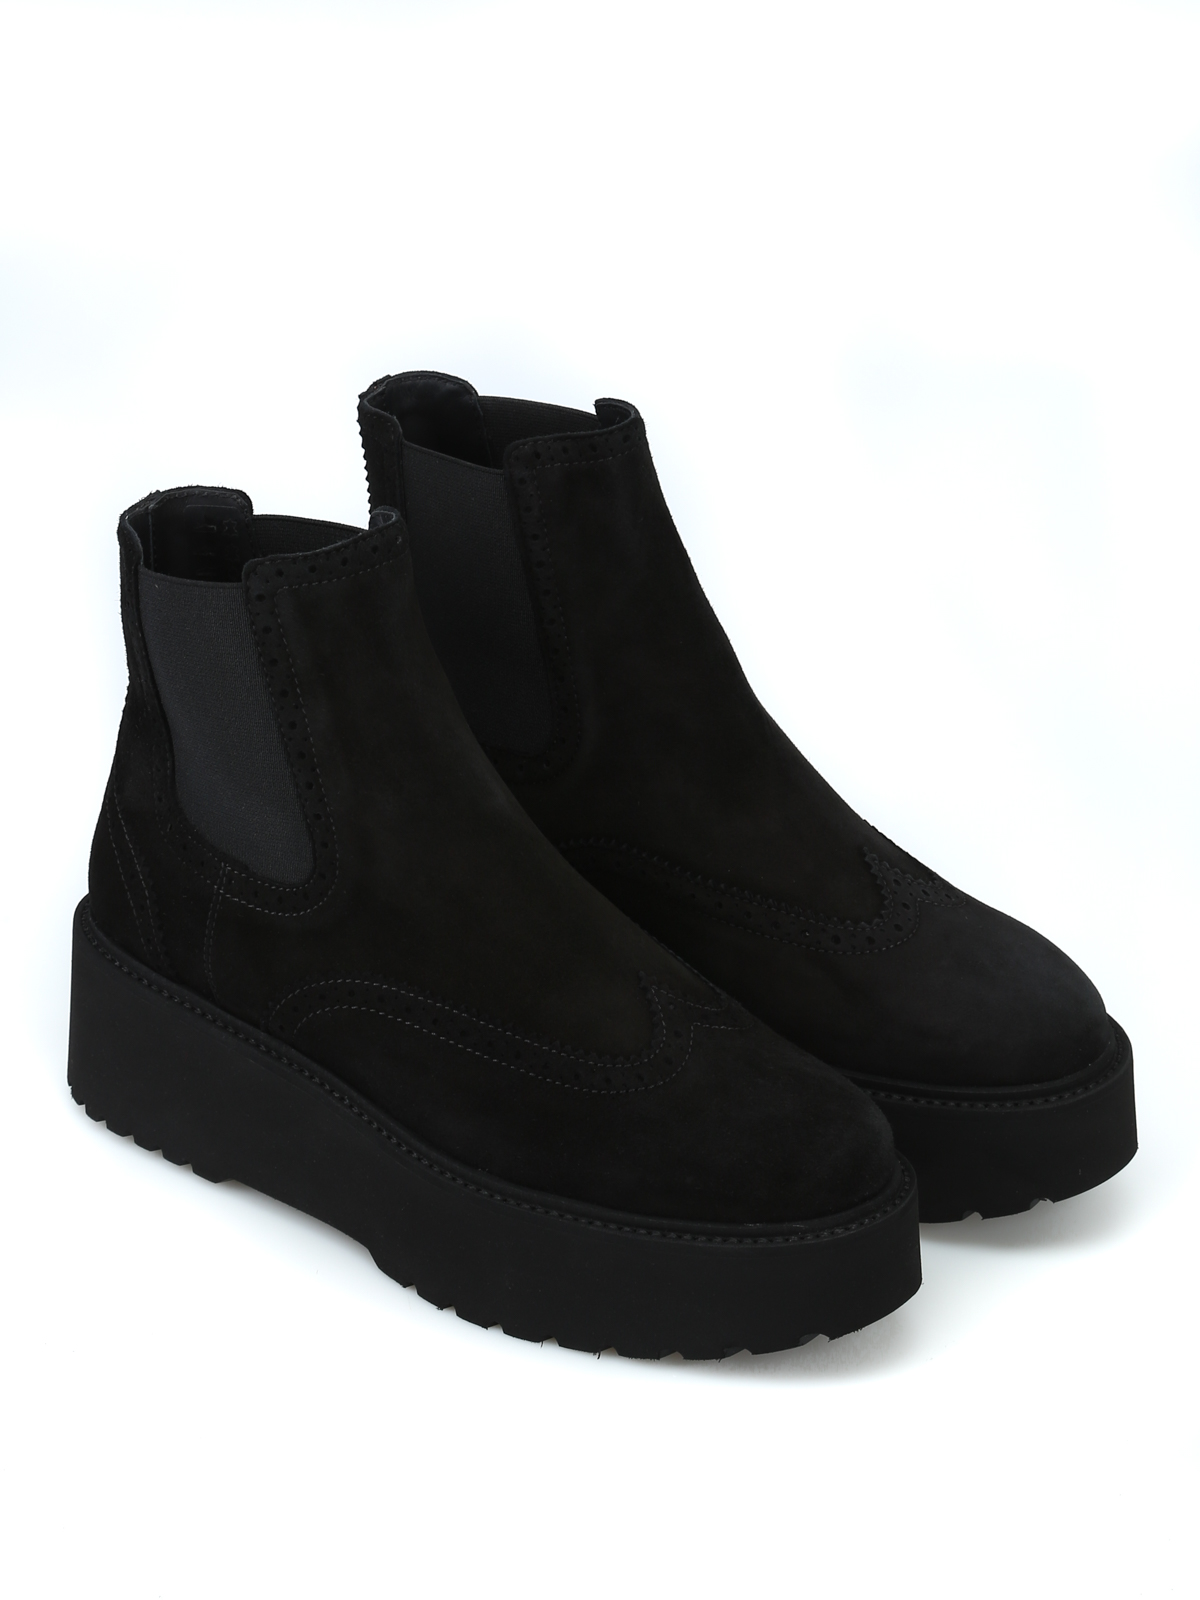 Hogan - Suede urban platform Chelsea boots - ankle boots -  HXW3550AO20CR0B999